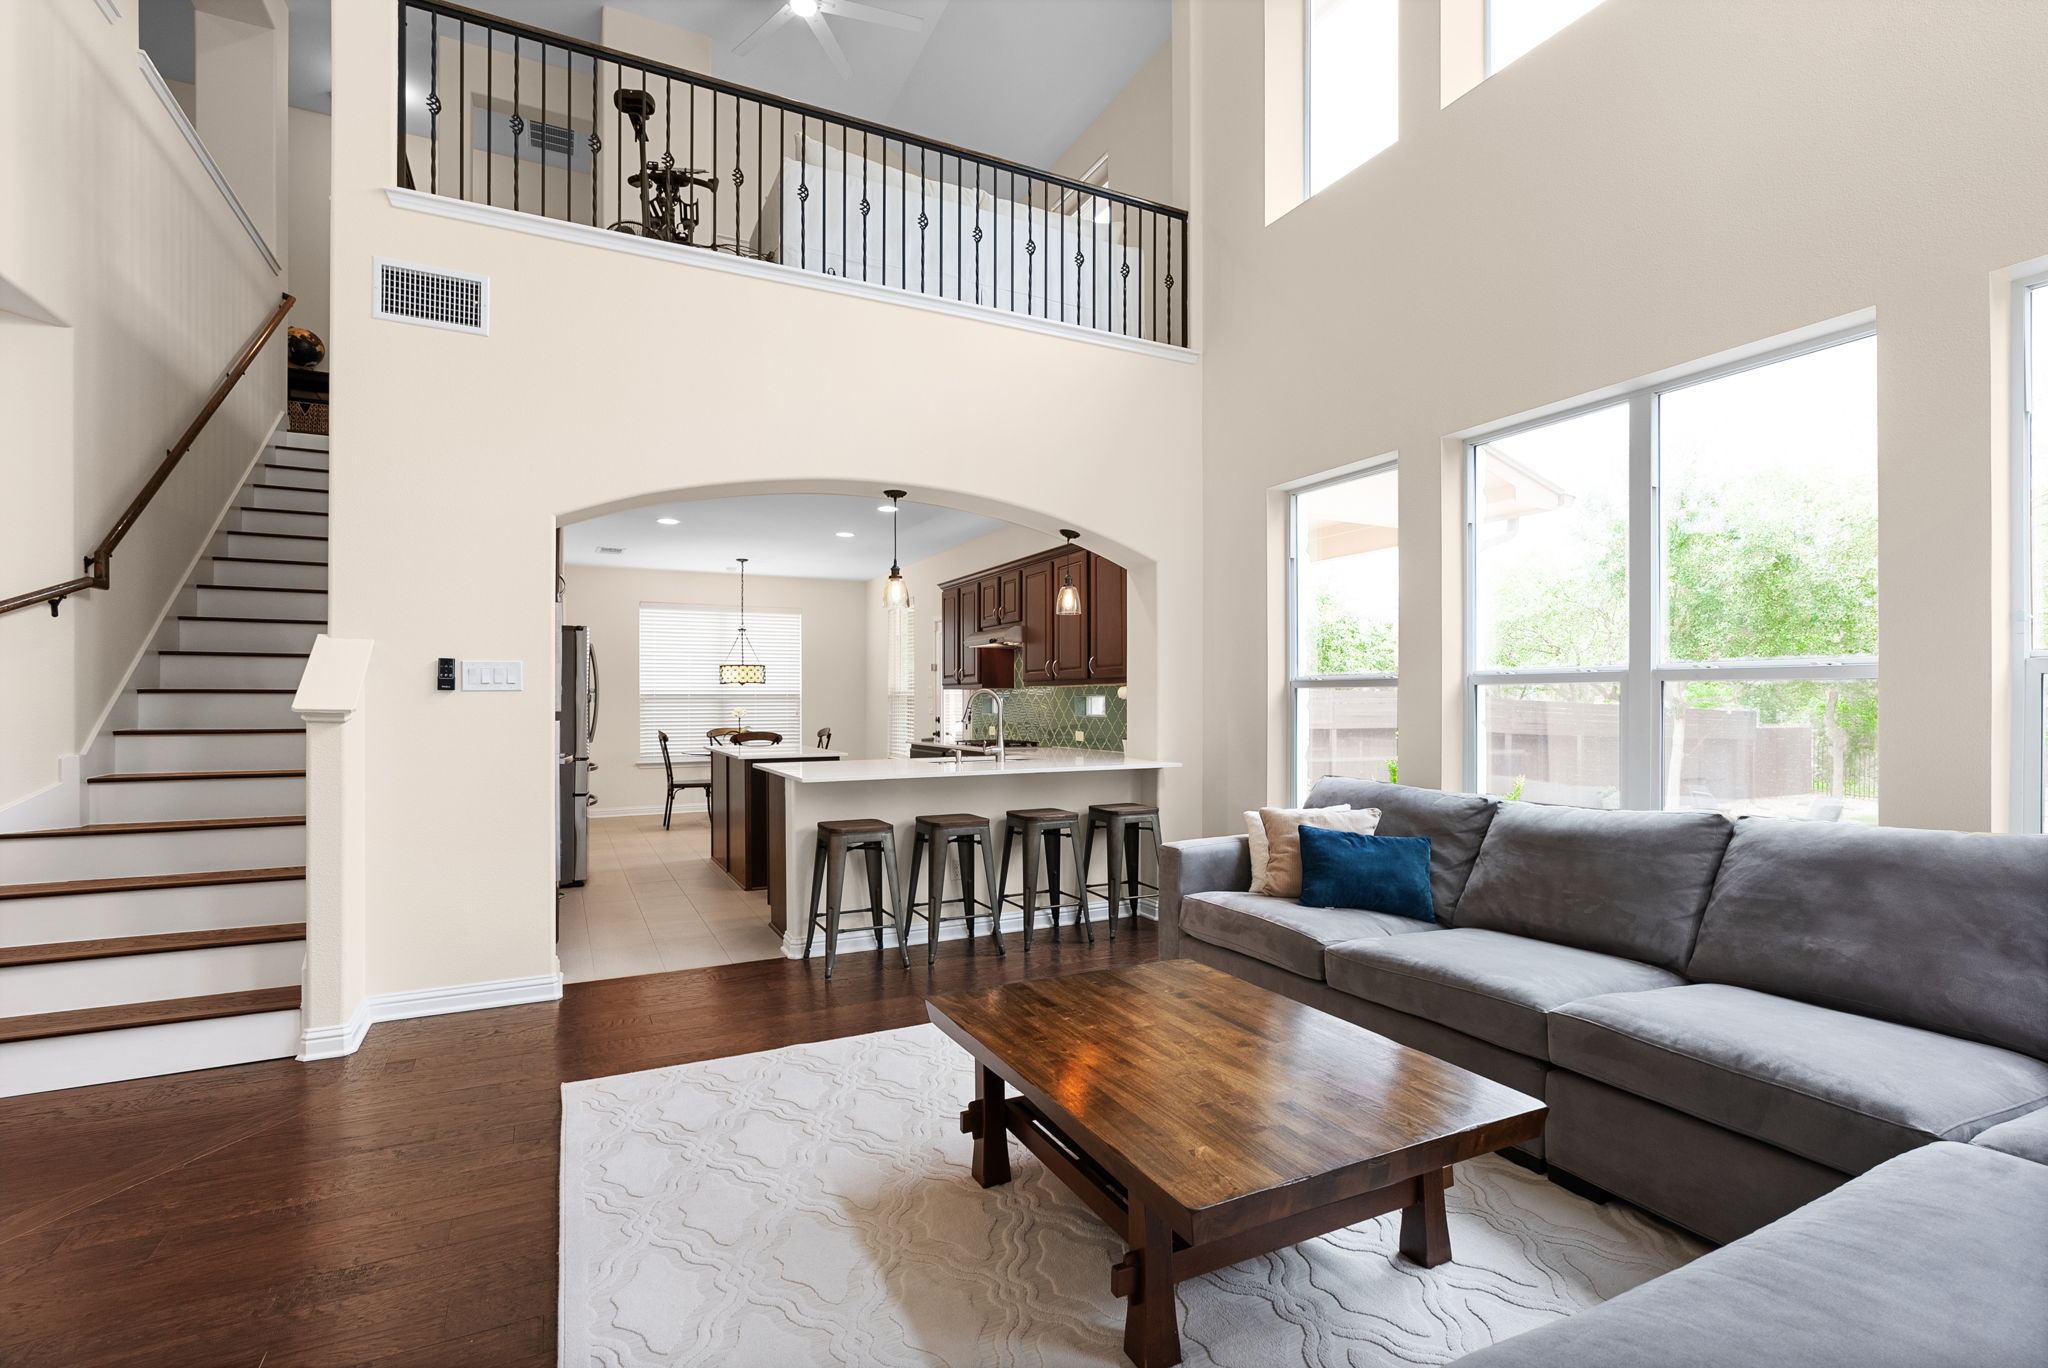 Two Story Ceilings with Floor to Ceiling Windows